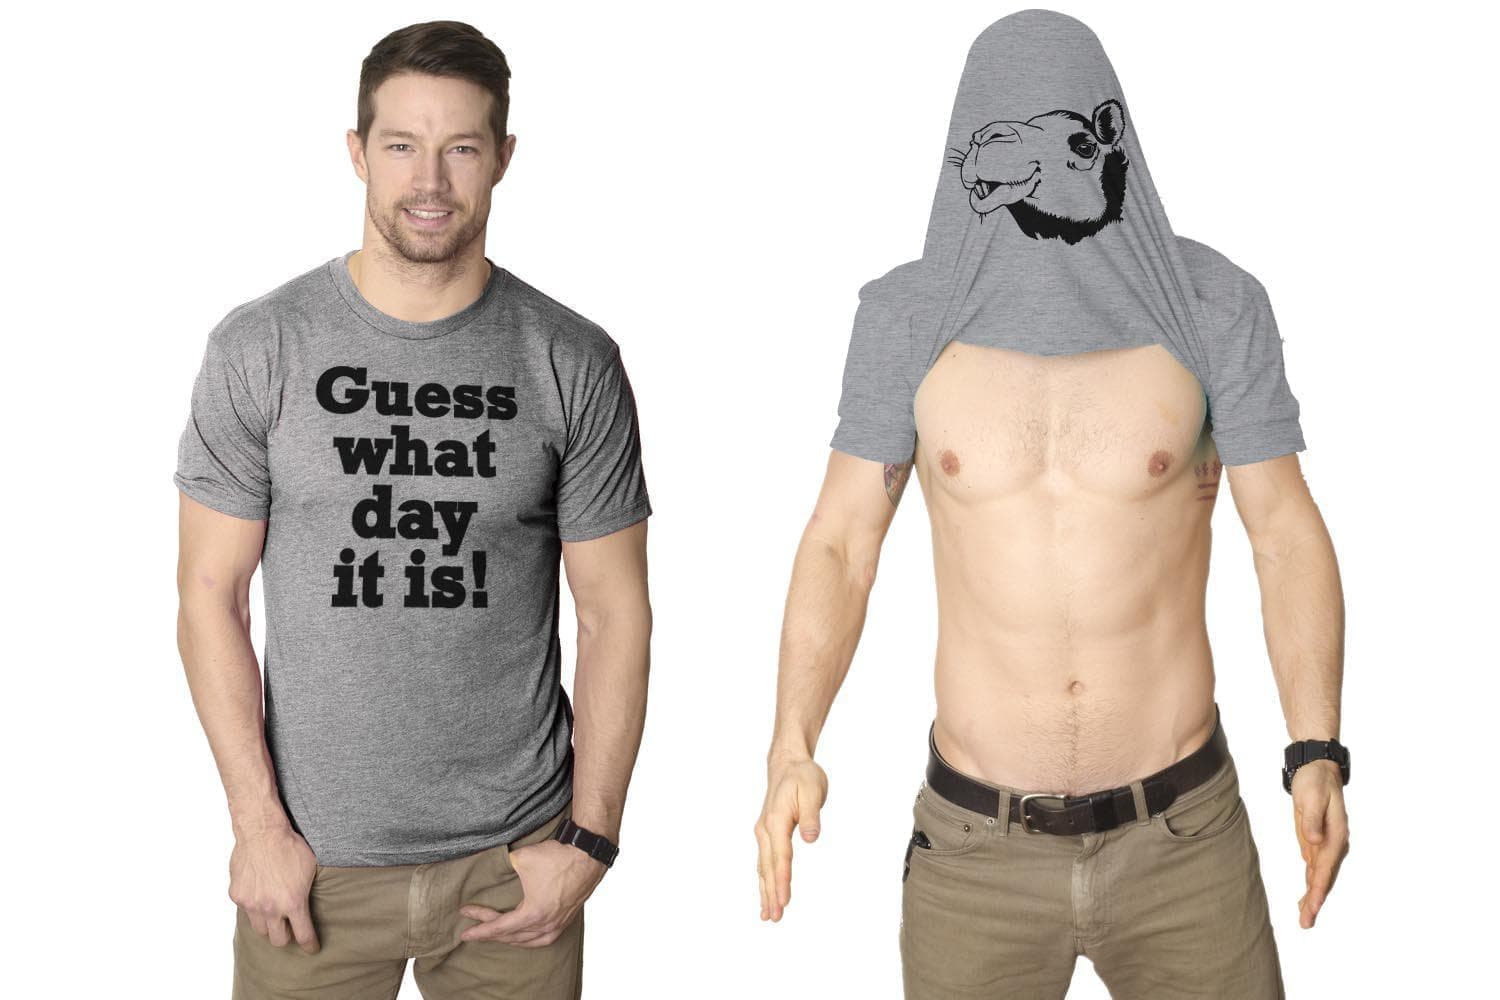 Guess What Day It Is Flip Men's Tshirt - Crazy Dog T-Shirts